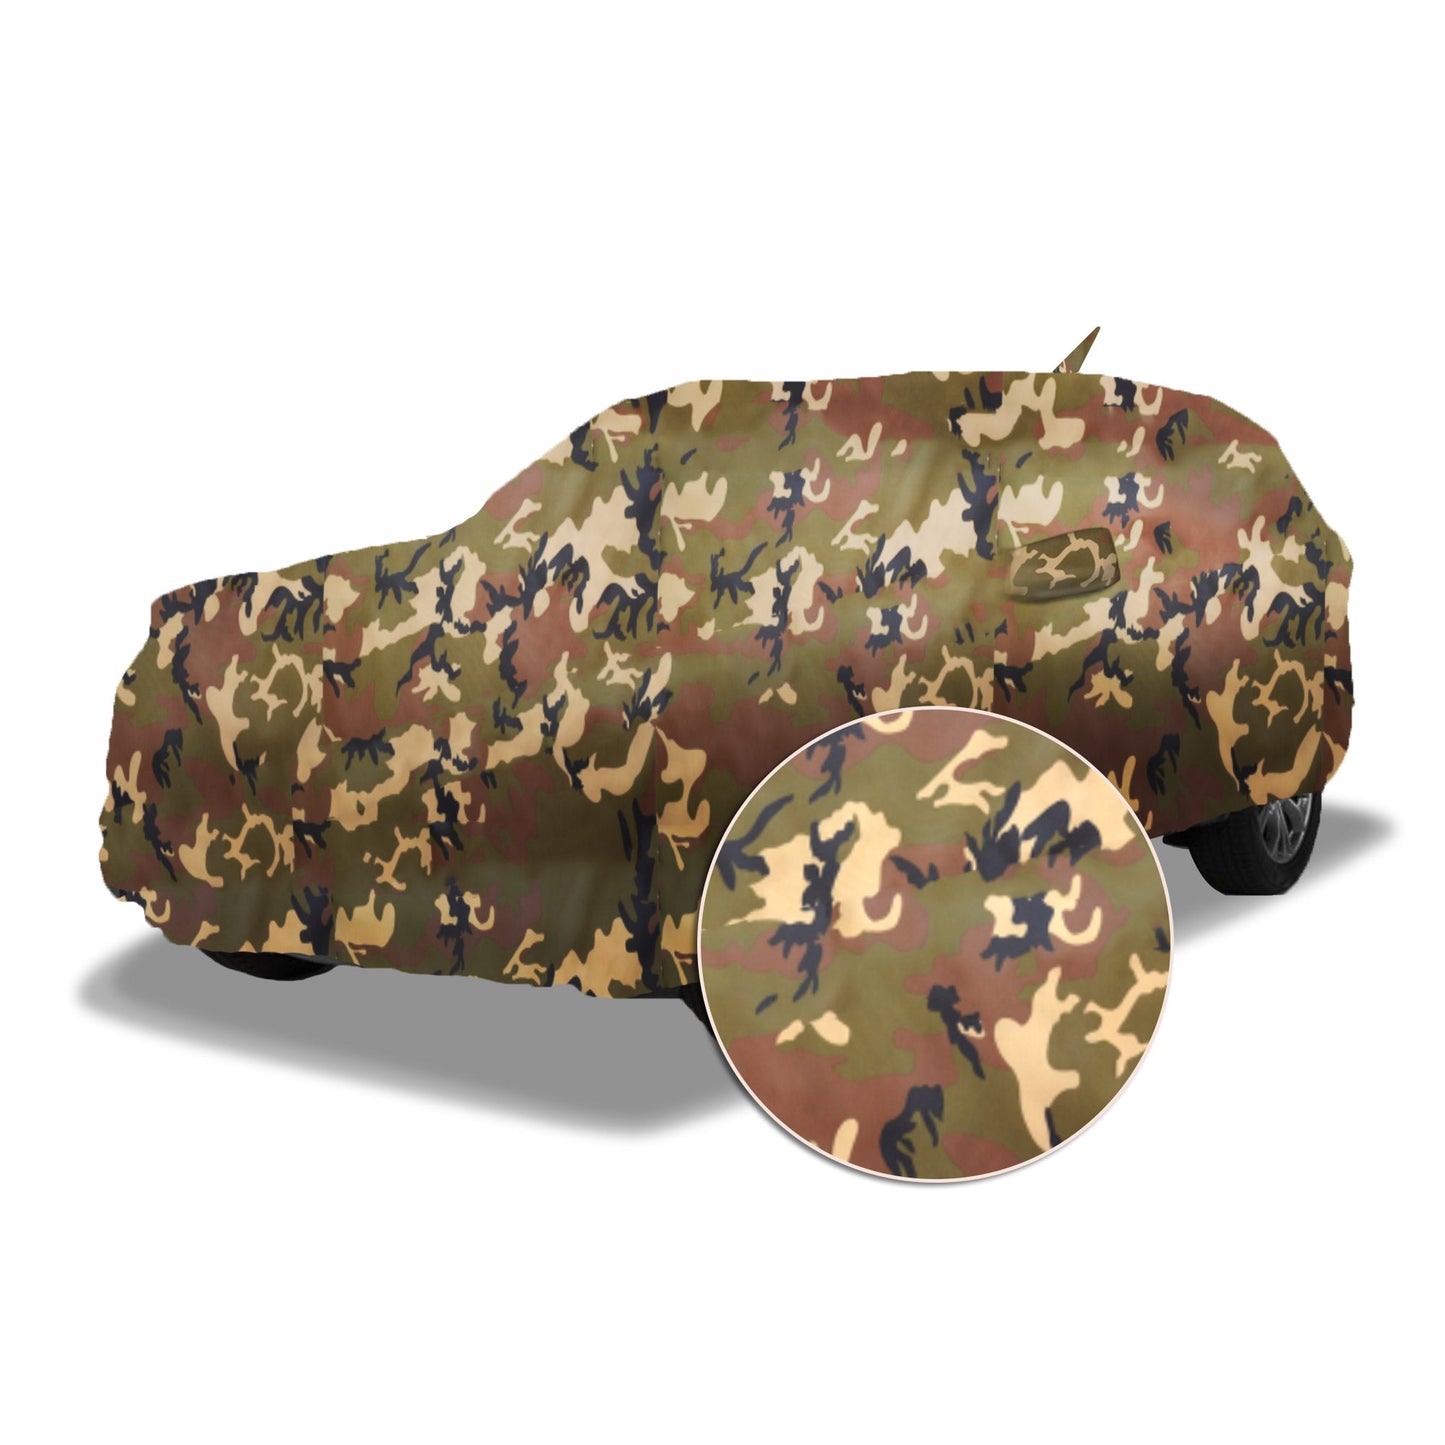 Ascot Volvo XC90 Recharge Car Body Cover Extra Strong & Dust Proof Jungle Military Car Cover with UV Proof & Water-Resistant Coating